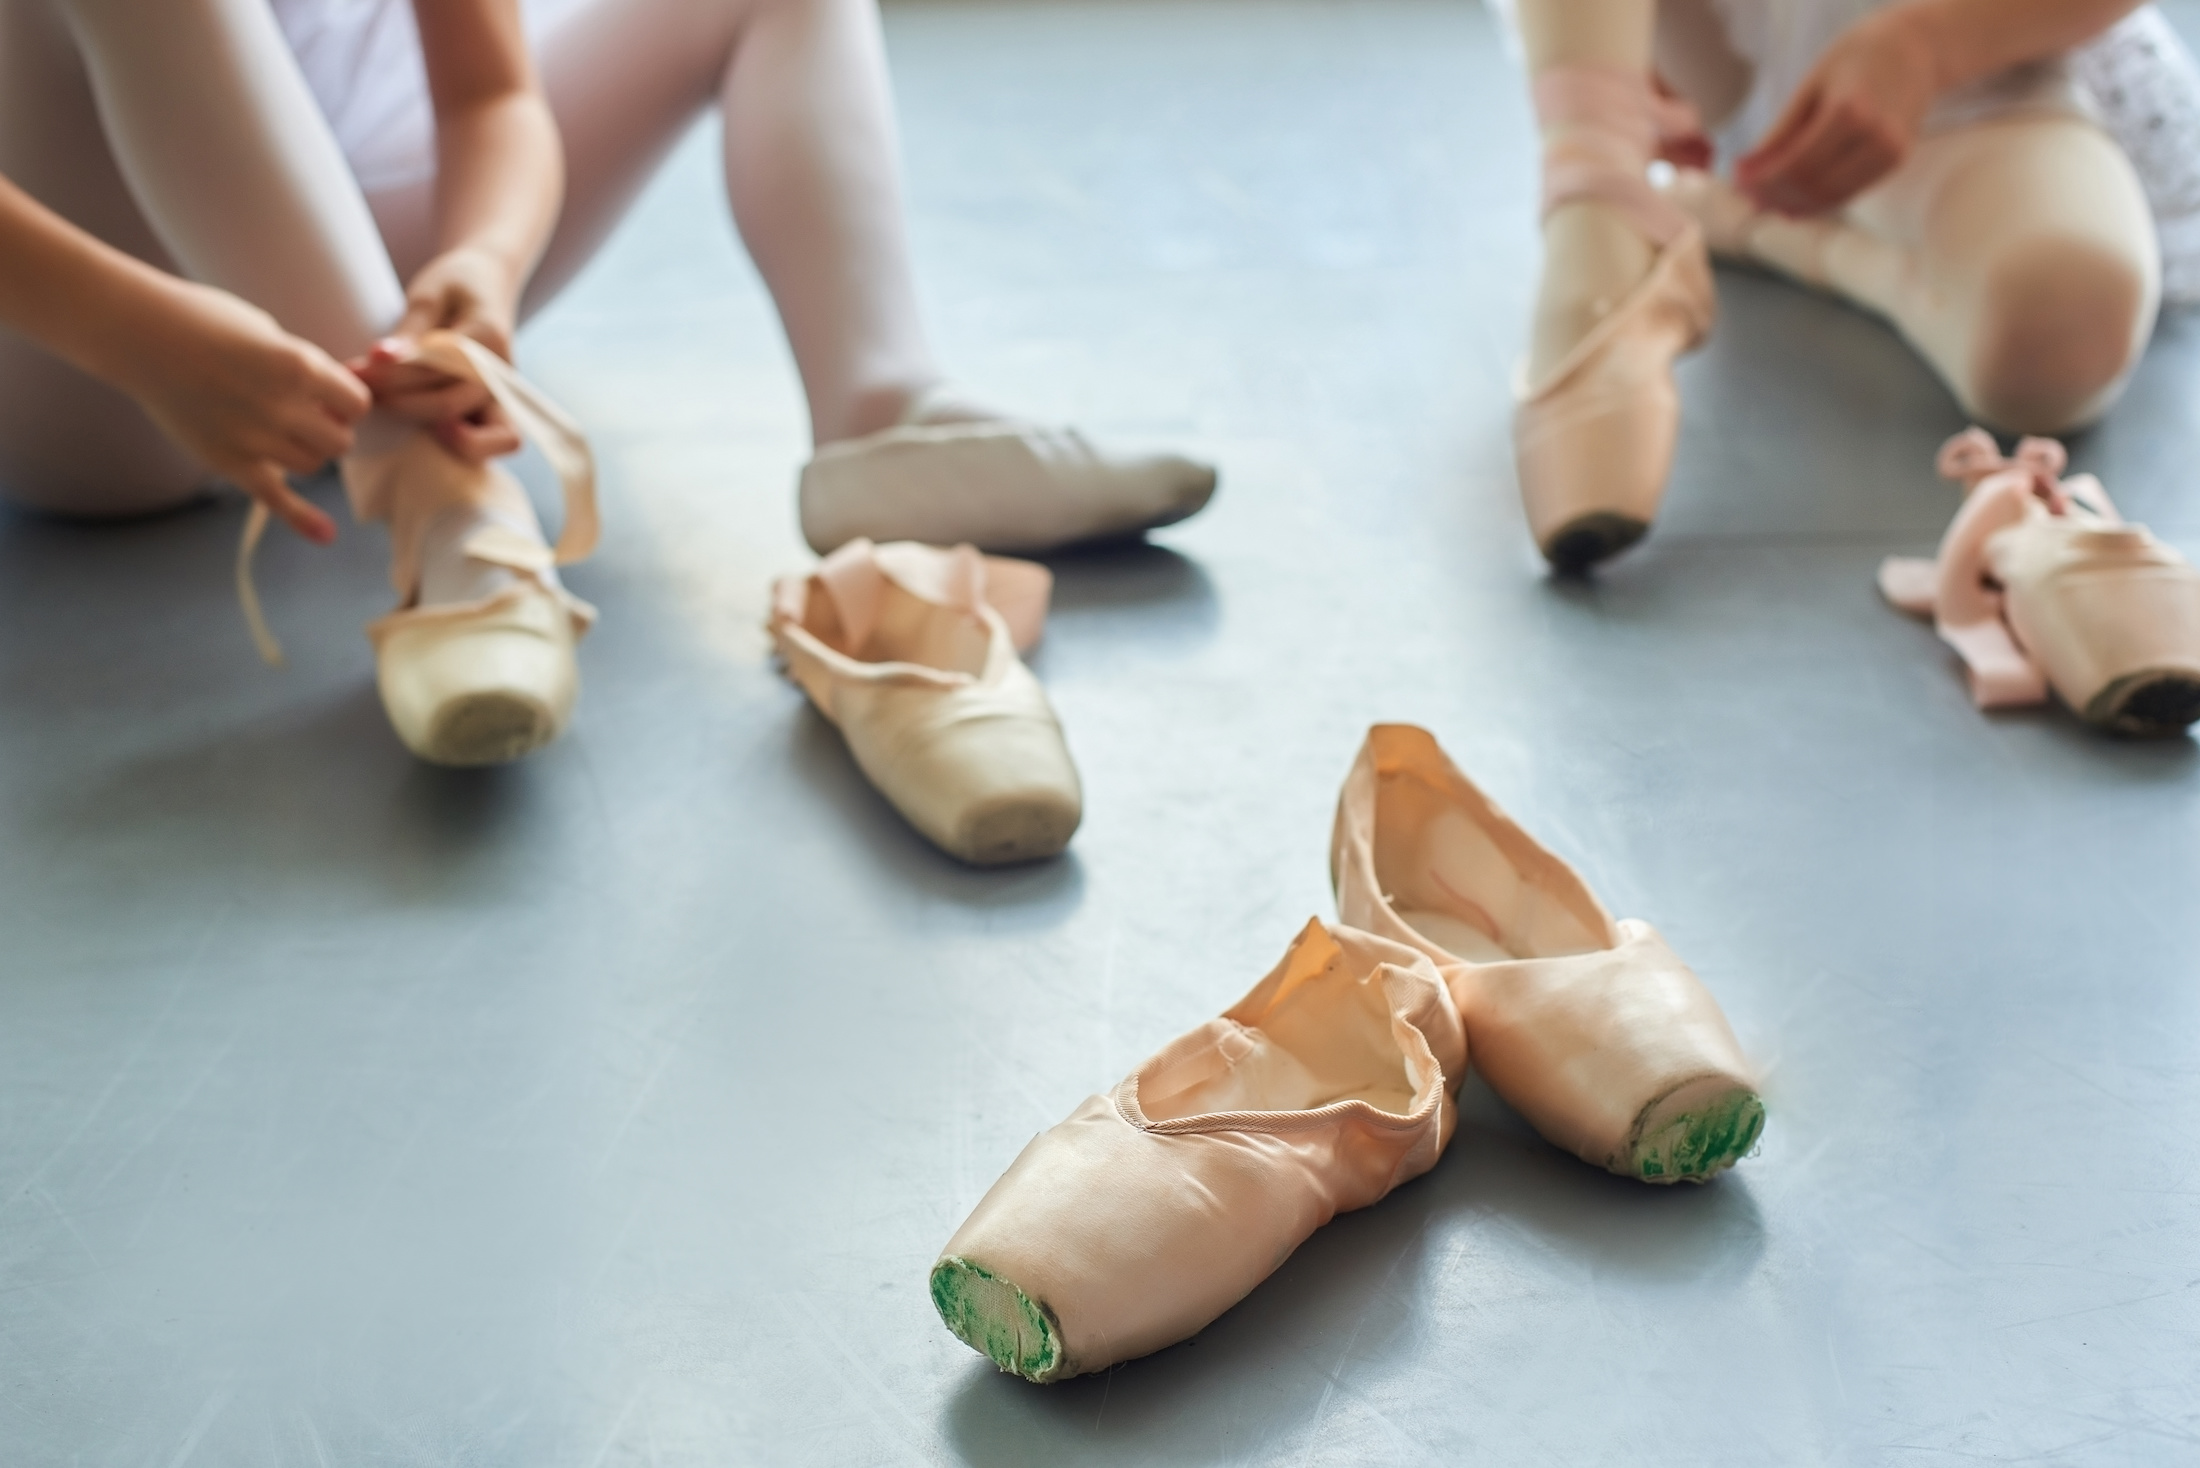 ballet dancers training for pointe shoes by starting on demi pointe